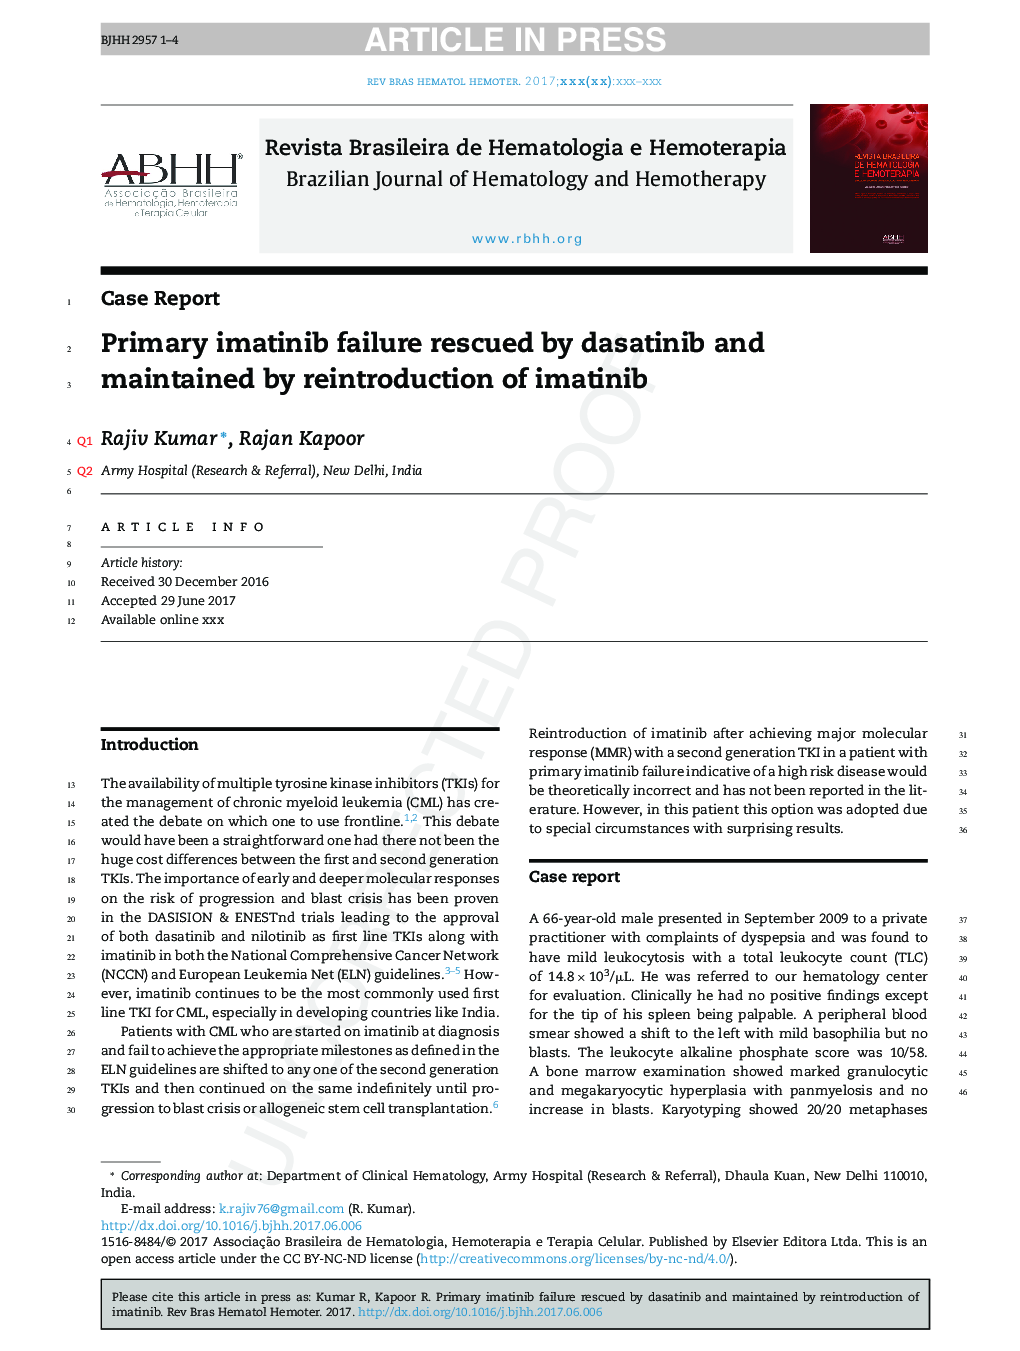 Primary imatinib failure rescued by dasatinib and maintained by reintroduction of imatinib